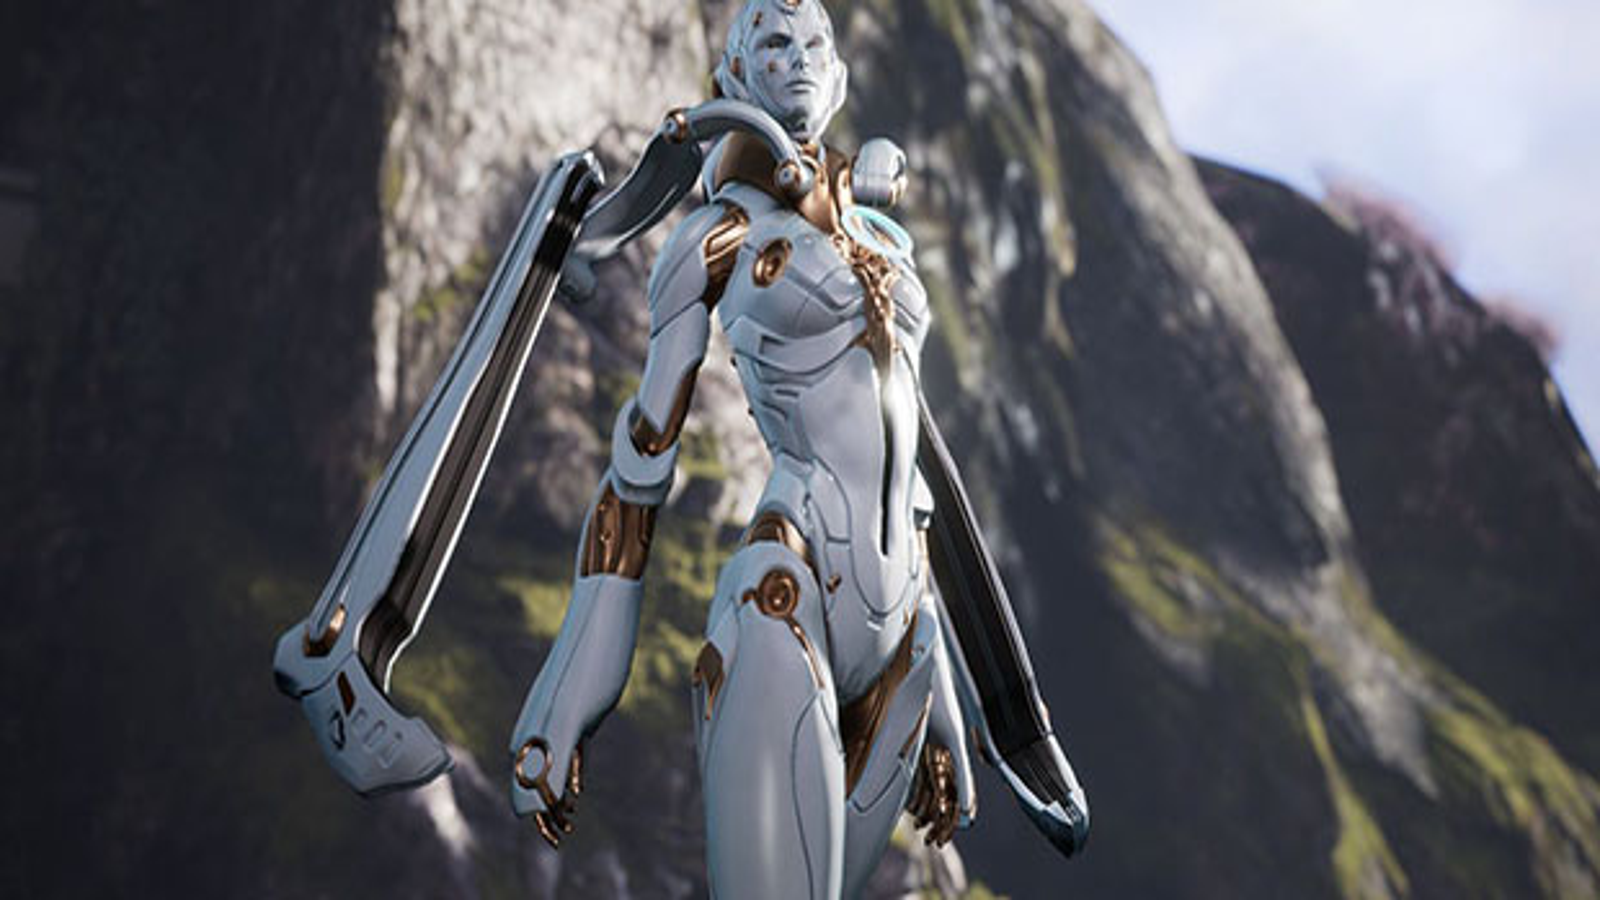 Epic sues gamer over creation of 'world's most powerful' Paragon